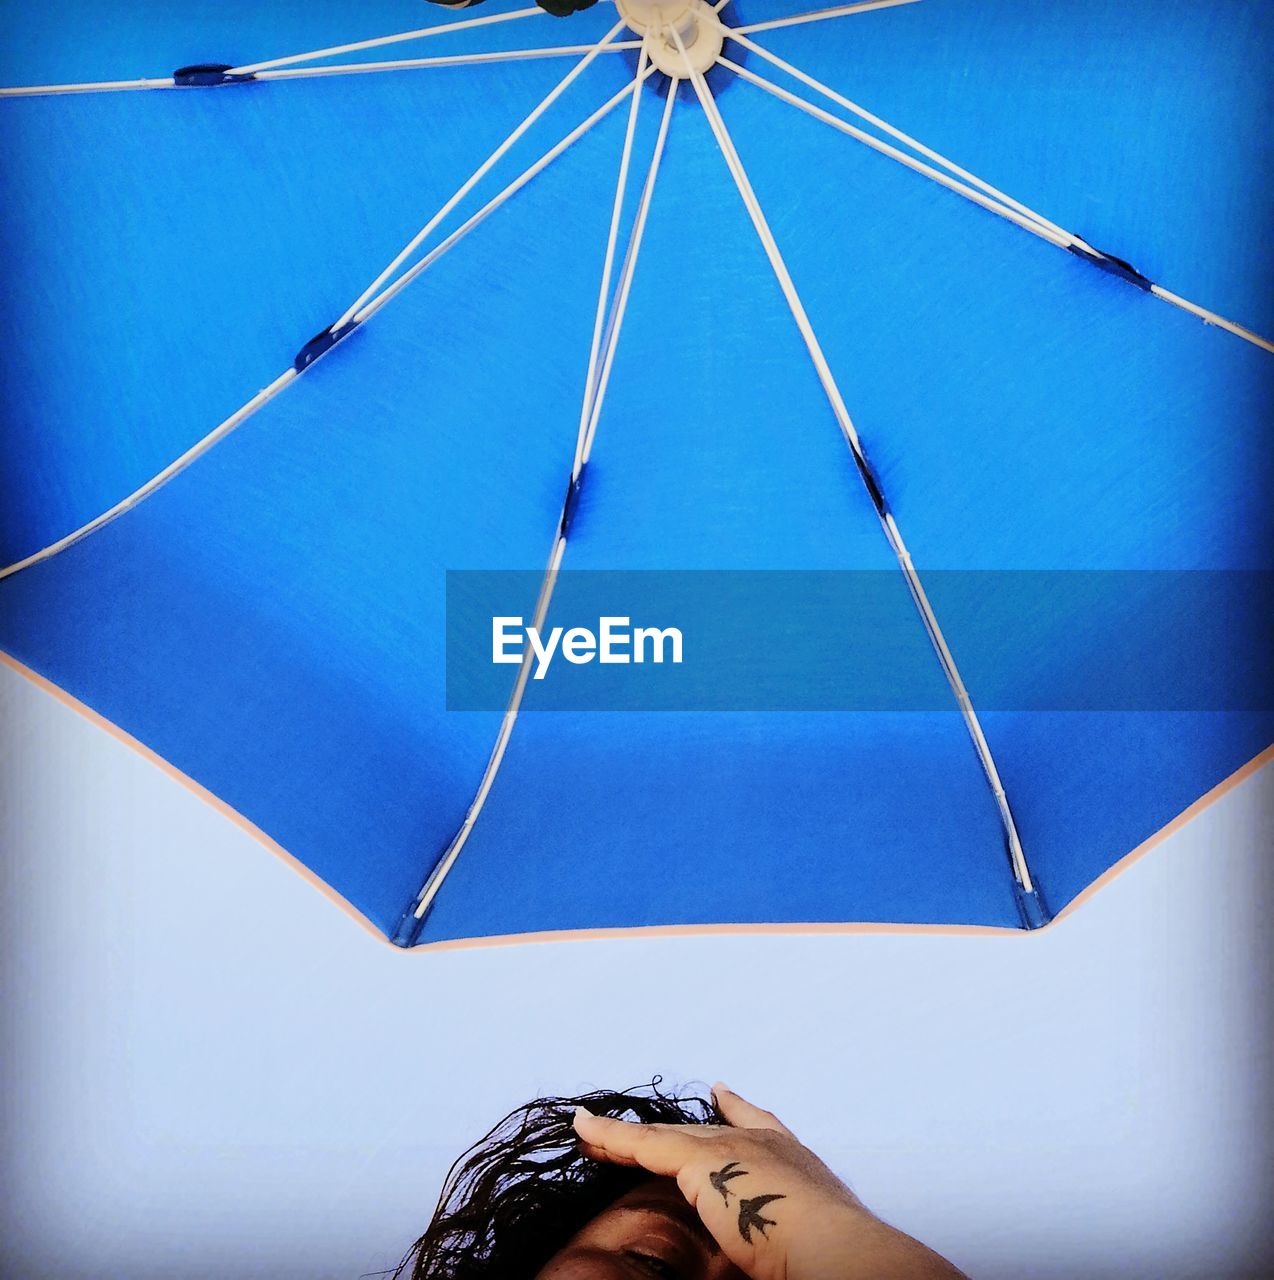 Low angle view of woman against umbrella